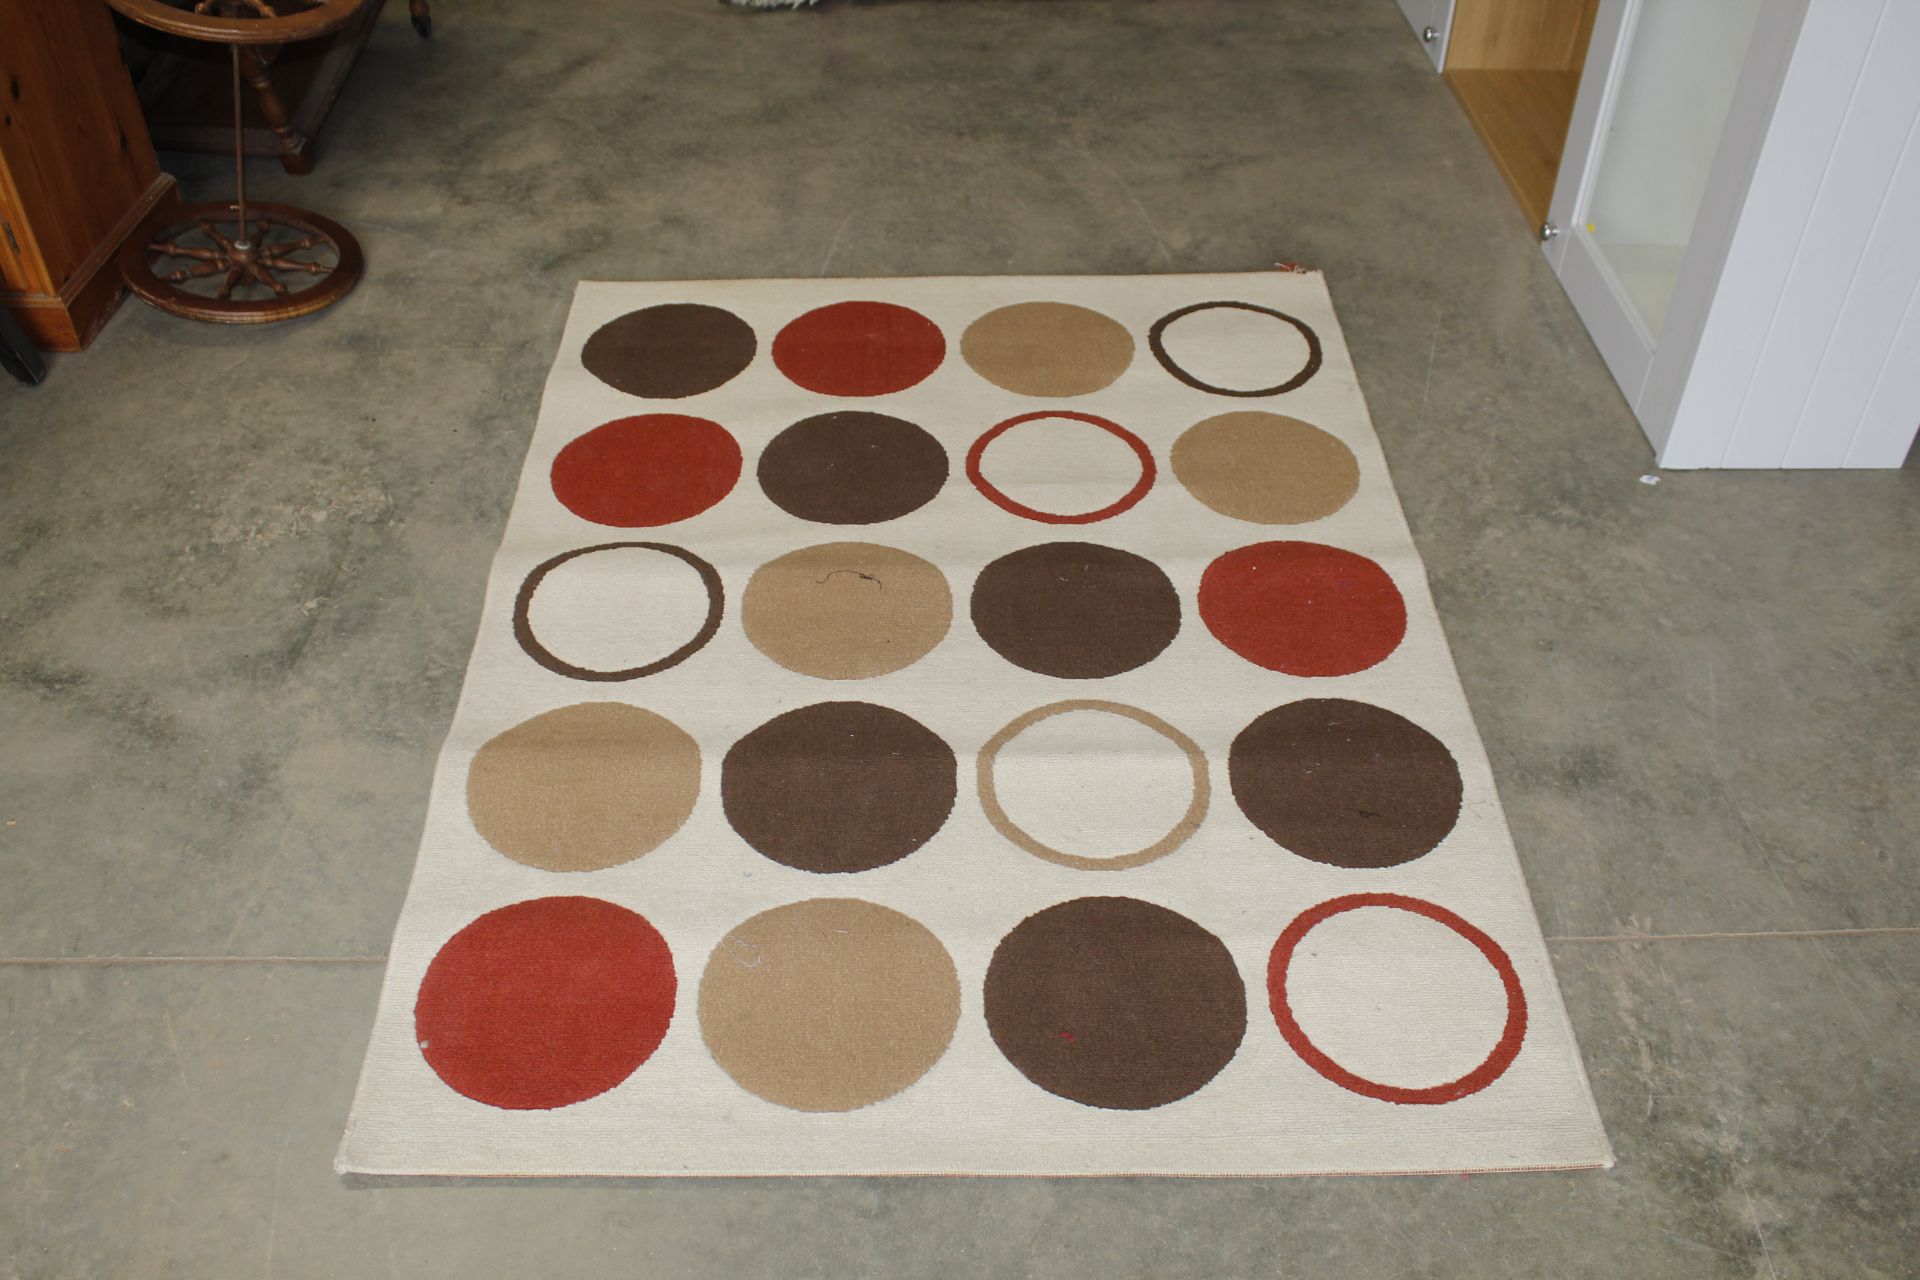 An approx. 5'3" x 4' modern patterned rug